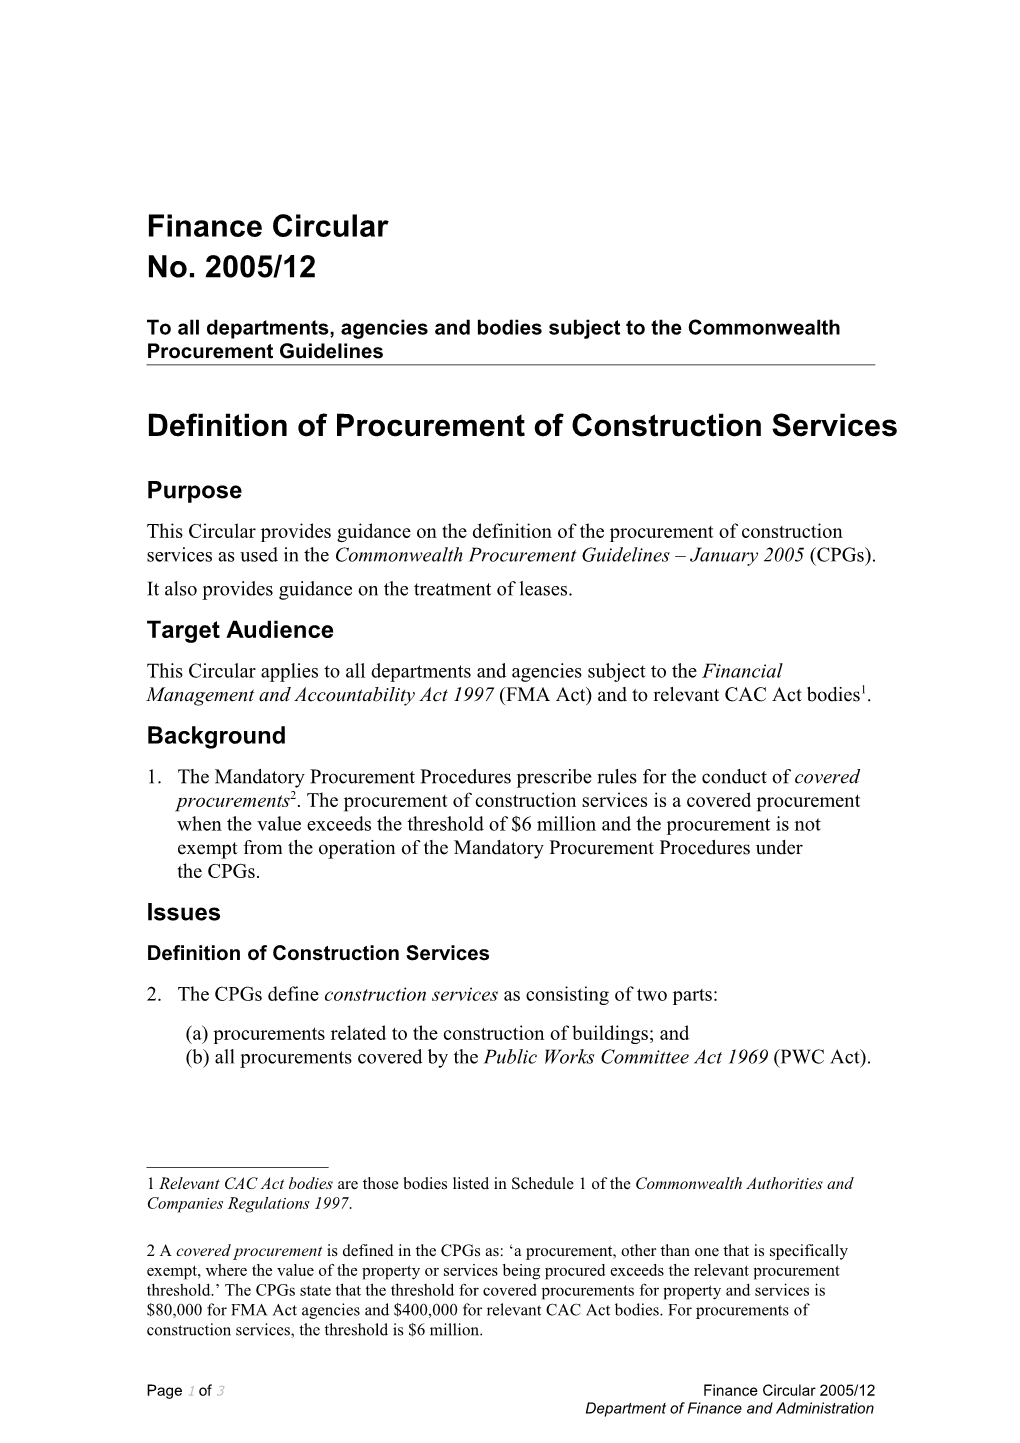 To All Departments, Agencies and Bodies Subject to the Commonwealth Procurement Guidelines